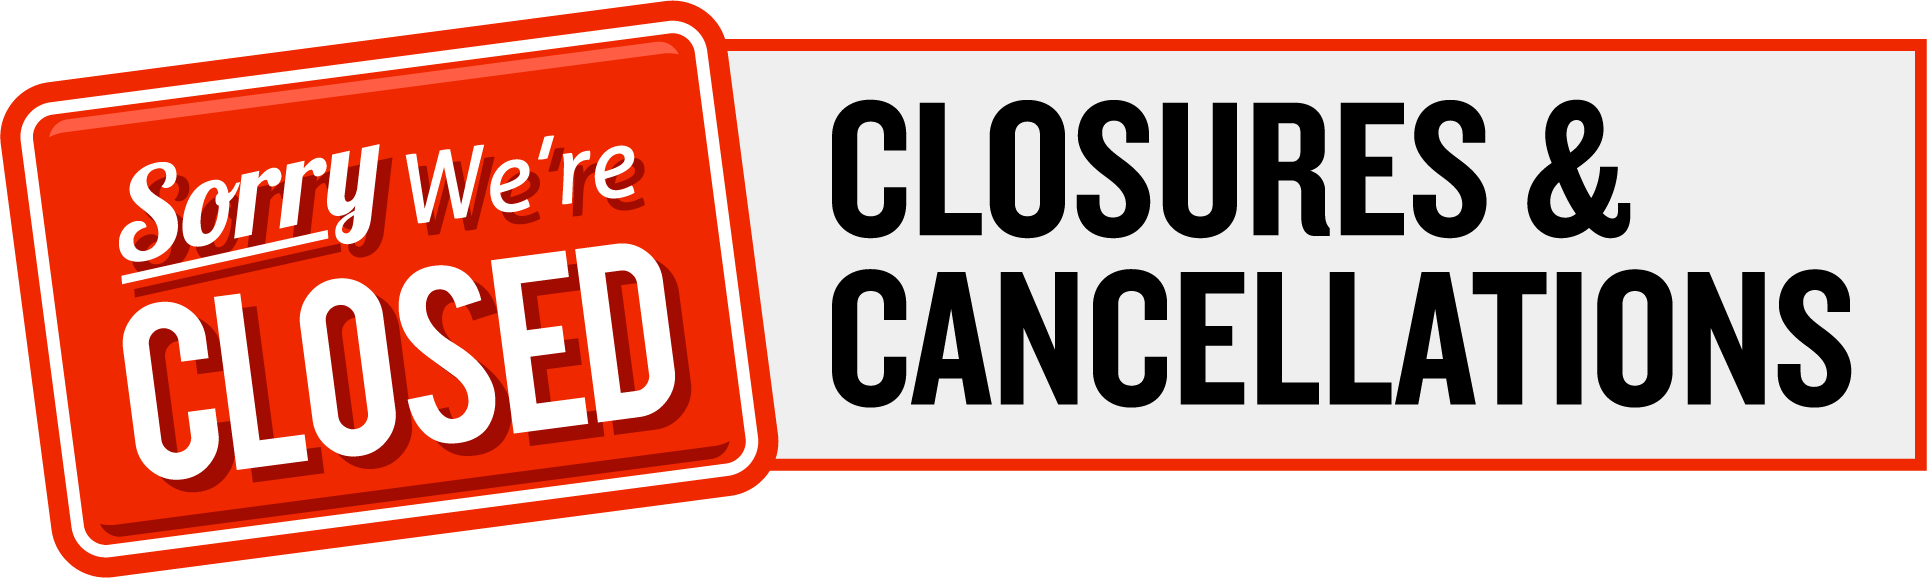 Closed Sign Closures Cancellations